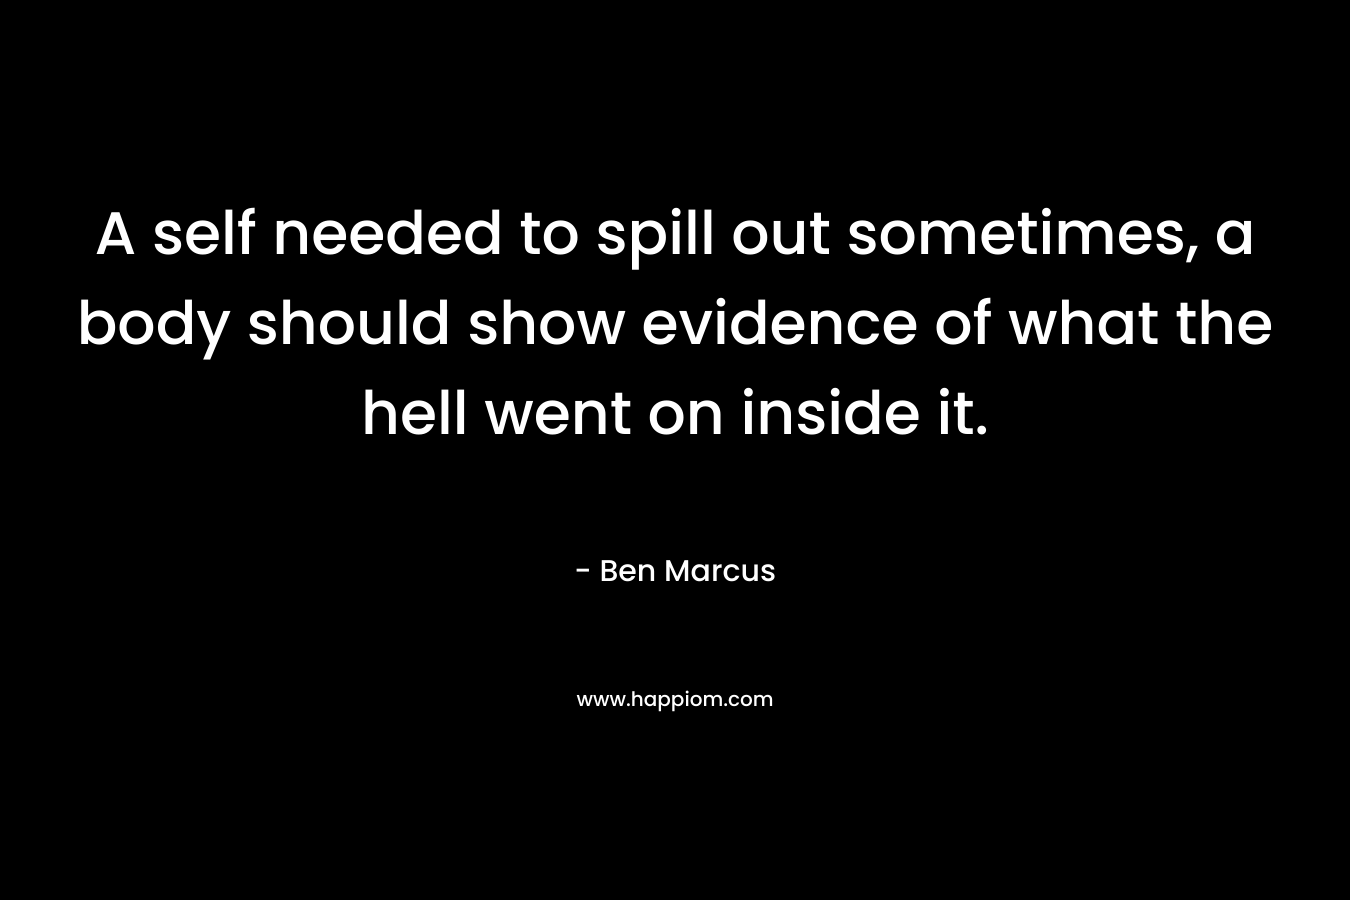 A self needed to spill out sometimes, a body should show evidence of what the hell went on inside it. – Ben Marcus